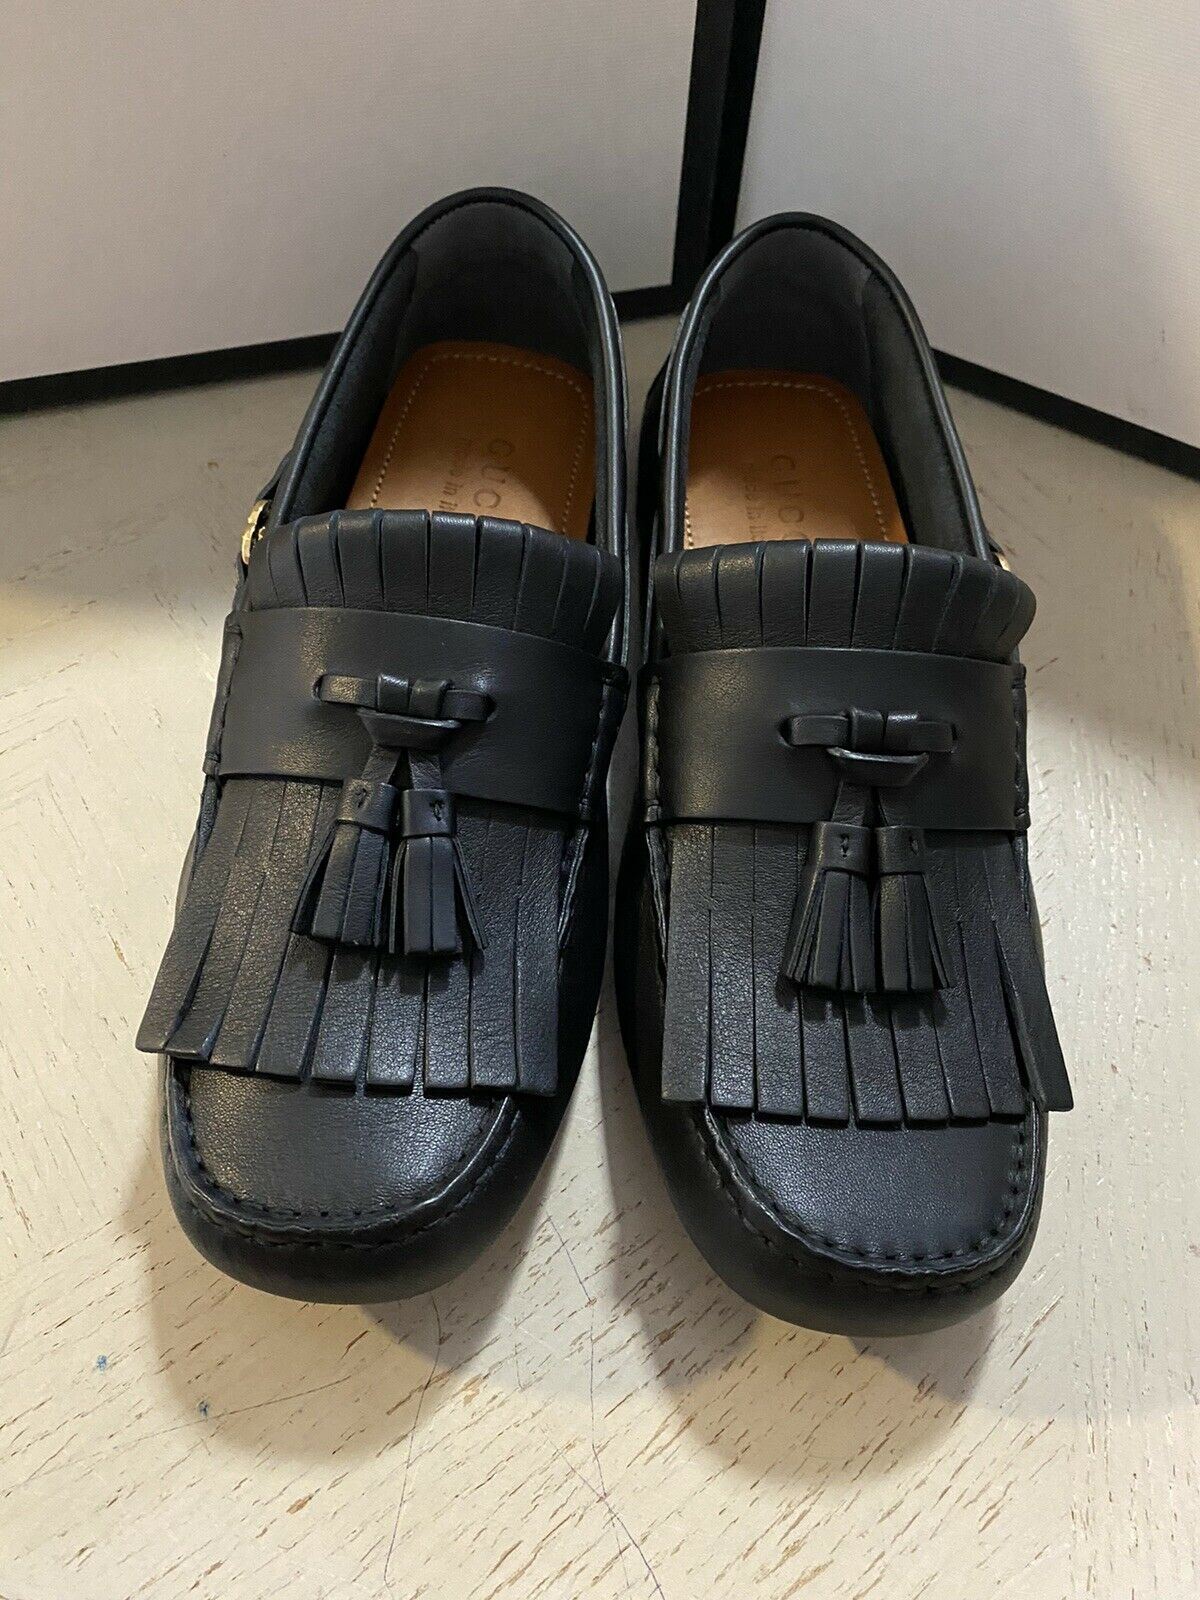 New Gucci Men’s GG Leather Driver Loafers Shoes Black 8 US ( 7 UK ) Italy